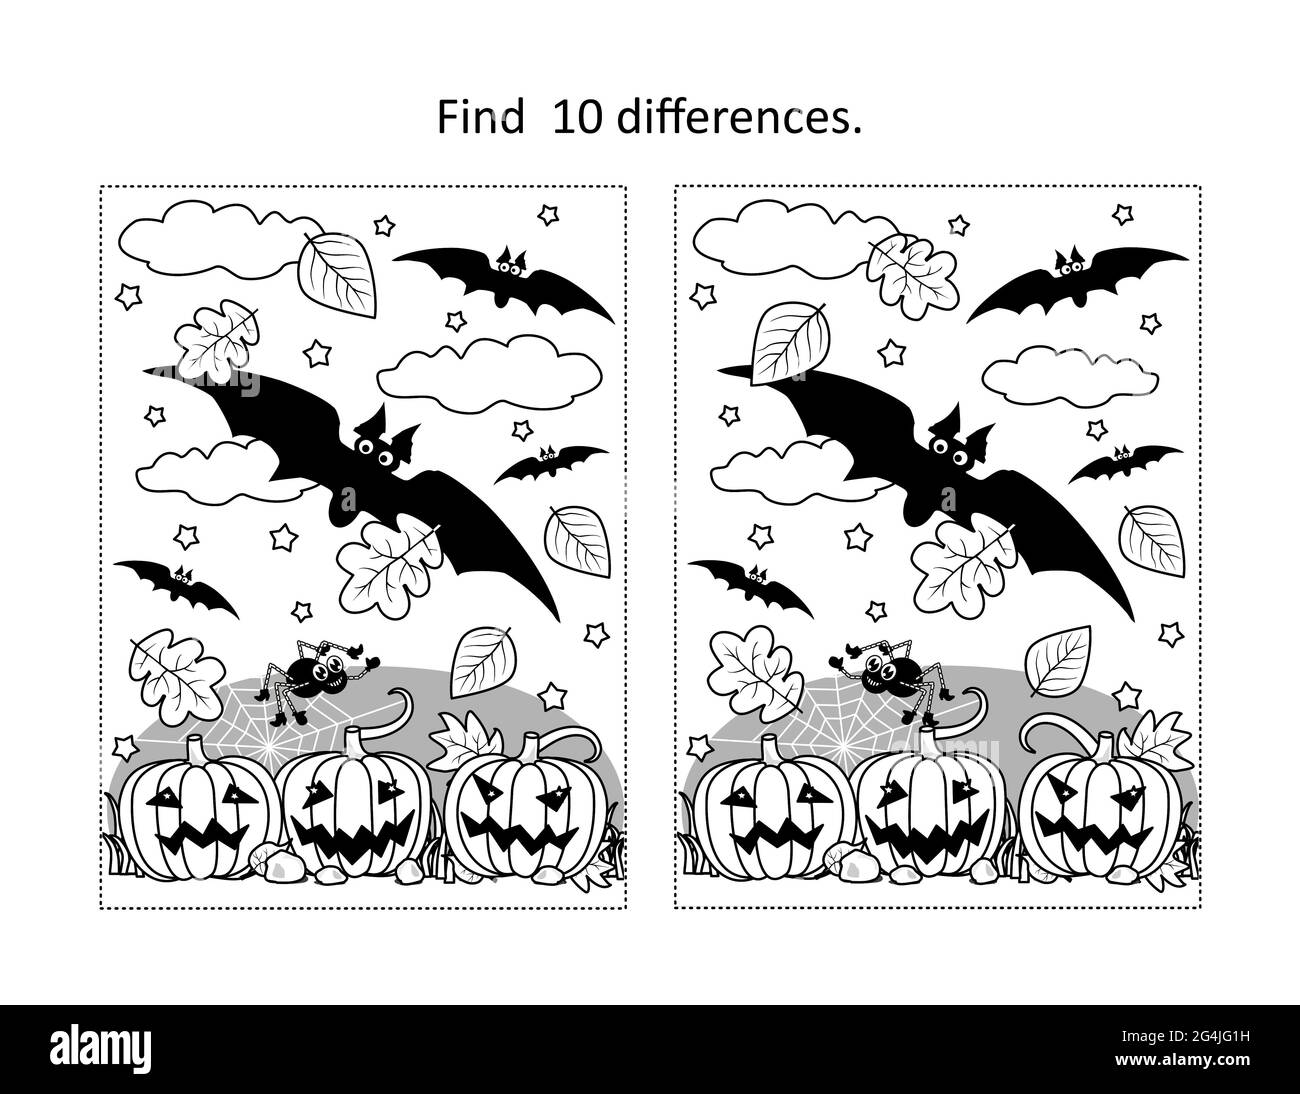 Find 10 differences visual puzzle and coloring page with Halloween bats fly above the pumpkin field Stock Photo